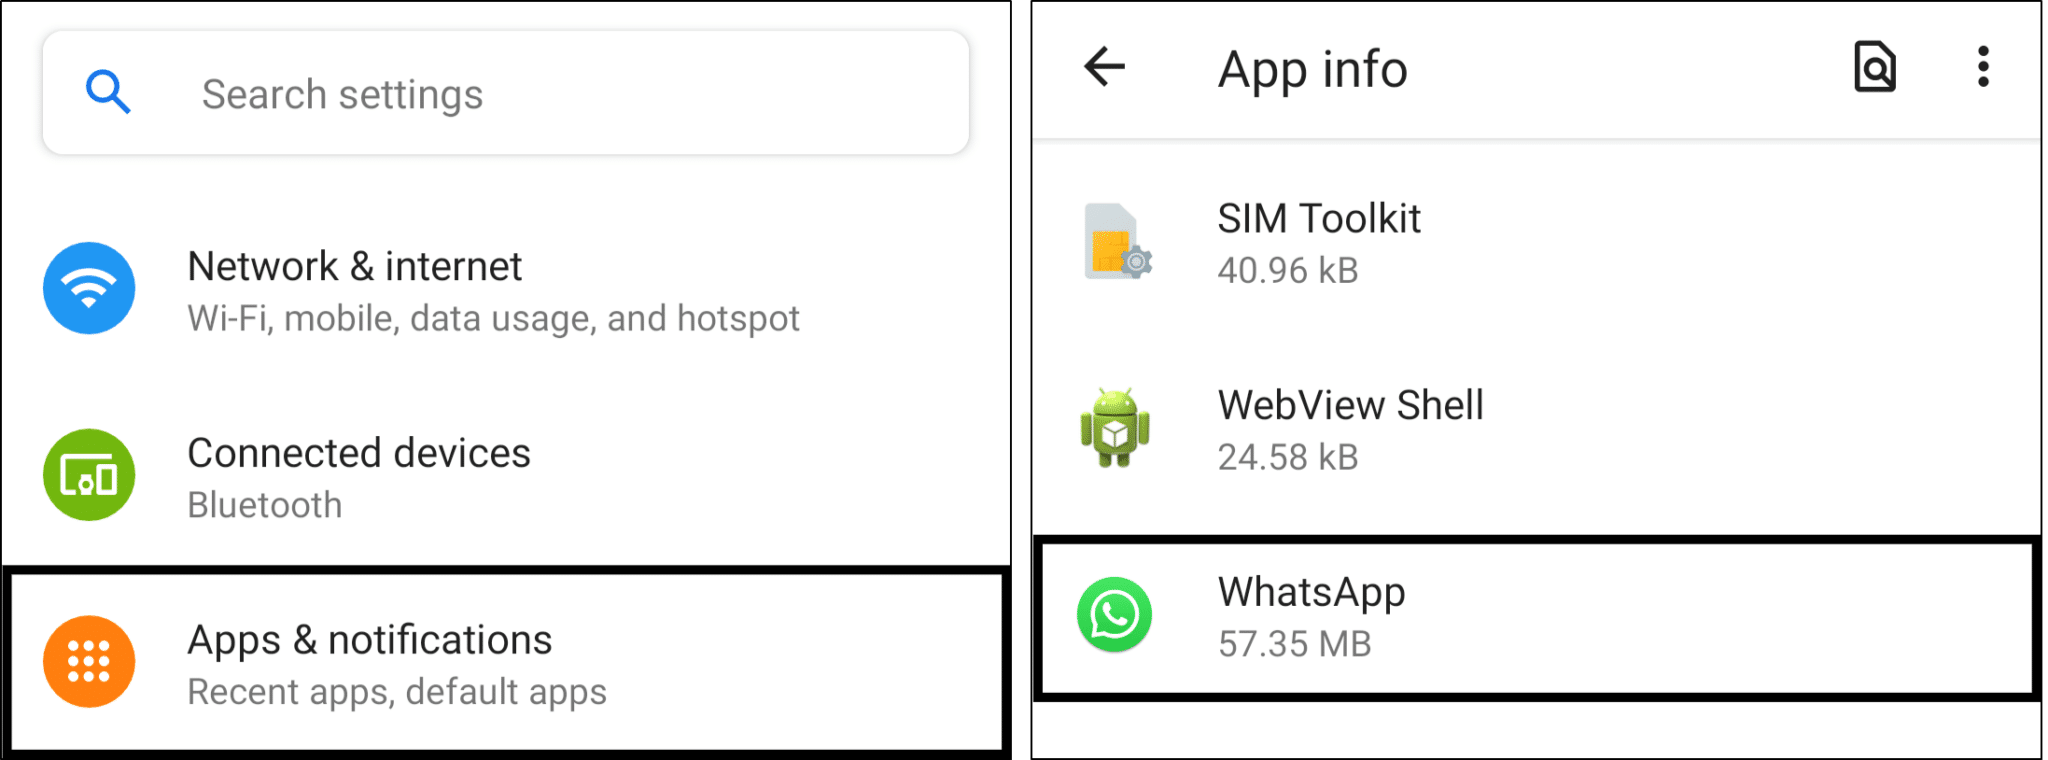 clear whatsapp cache and app data on Android to fix whatsapp status "couldn't send" error